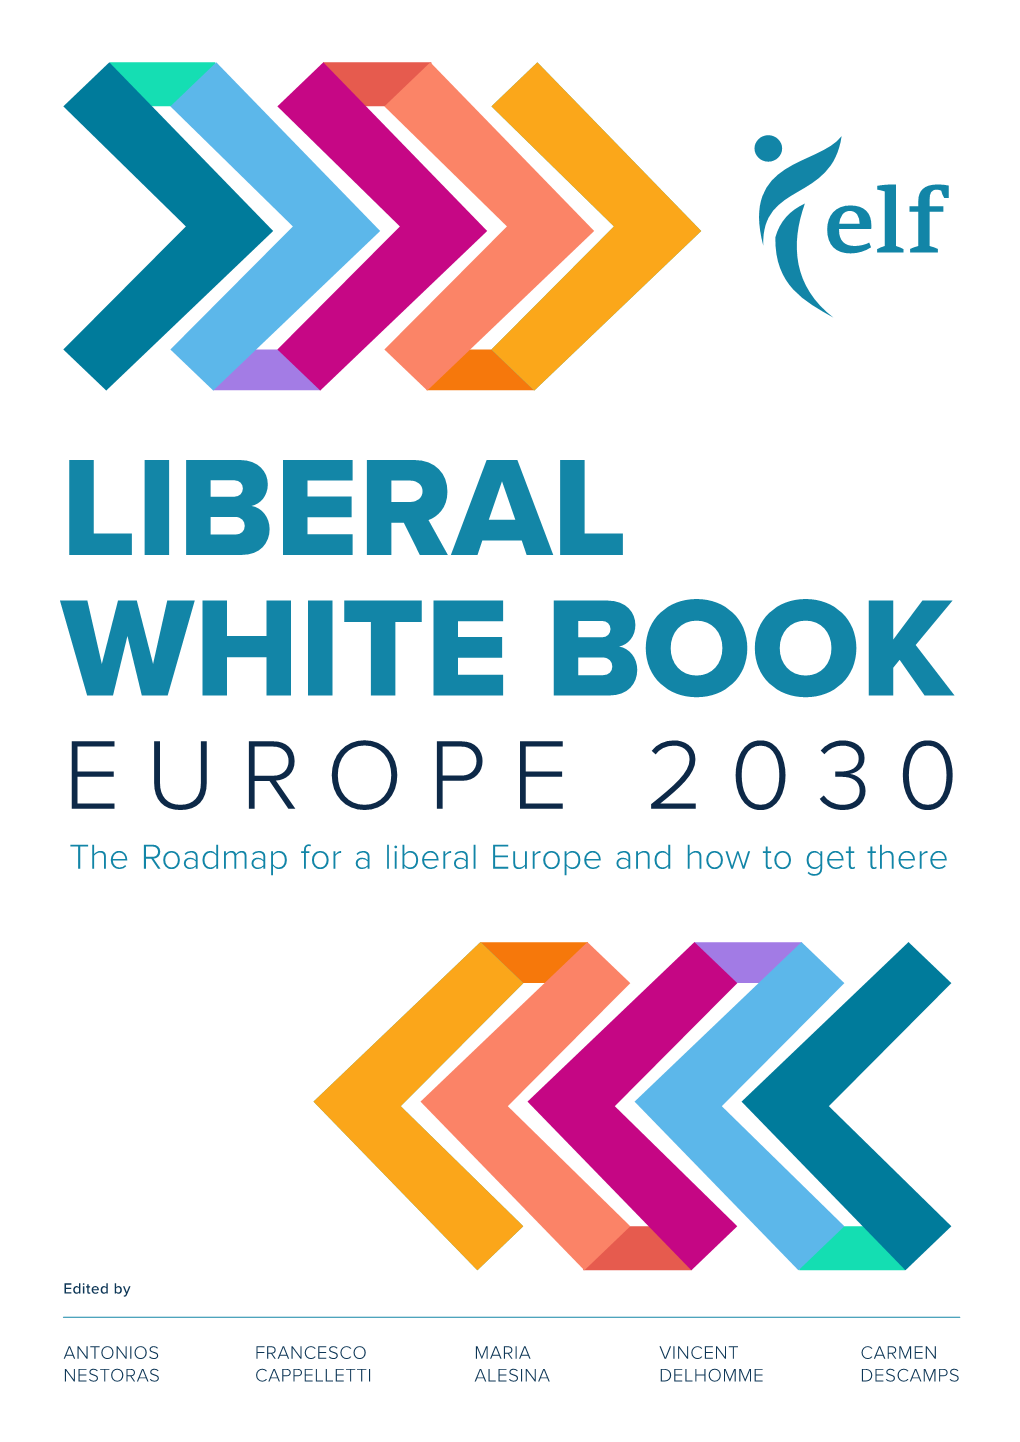 EUROPE 2030 the Roadmap for a Liberal Europe and How to Get There